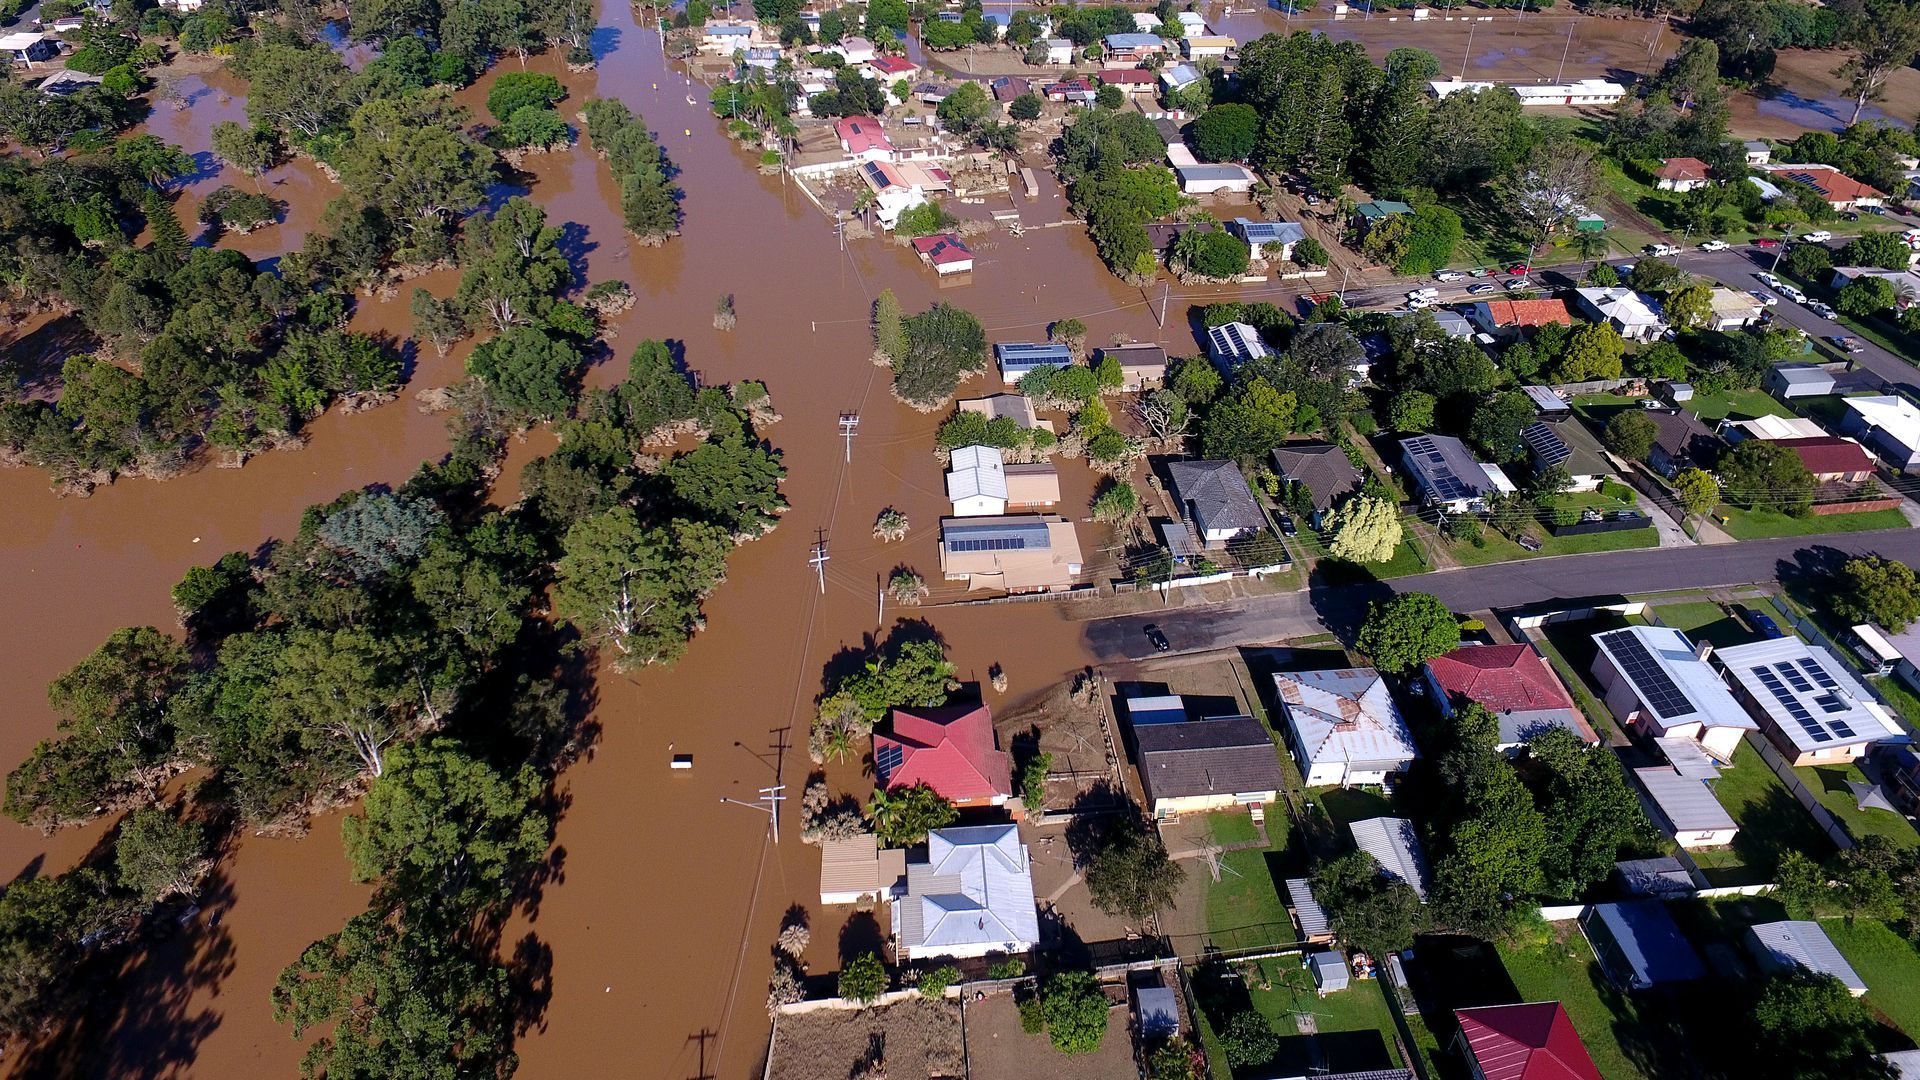 Properties in the suburb of Goodna in the far southwestern outskirts of Brisbane, Australia, are seen inundated by floodwaters on March 1. 